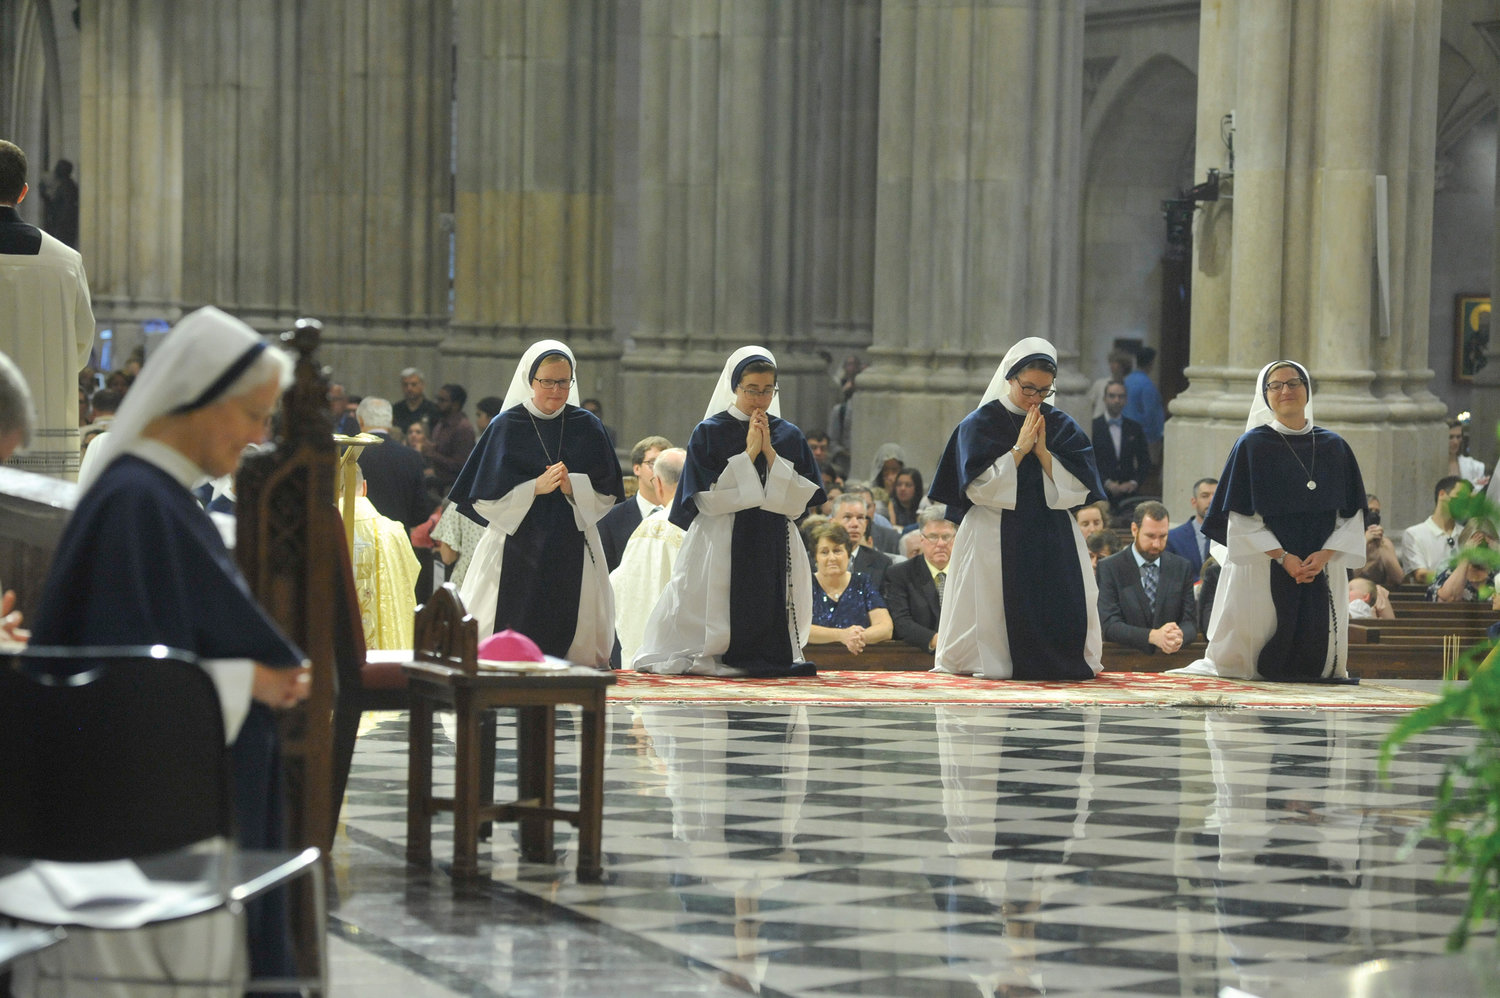 Kneeling in prayer in the sanctuary are, from left, Sister Lucia Christi, S.V.; Sister Caroline Caritas, S.V.; Sister Marie  Frassati, S.V.; and Sister Gemma Grace Marie, S.V. In the foreground at far left is Sister Agnes Mary Donovan, S.V., superior general of the Sisters of Life.